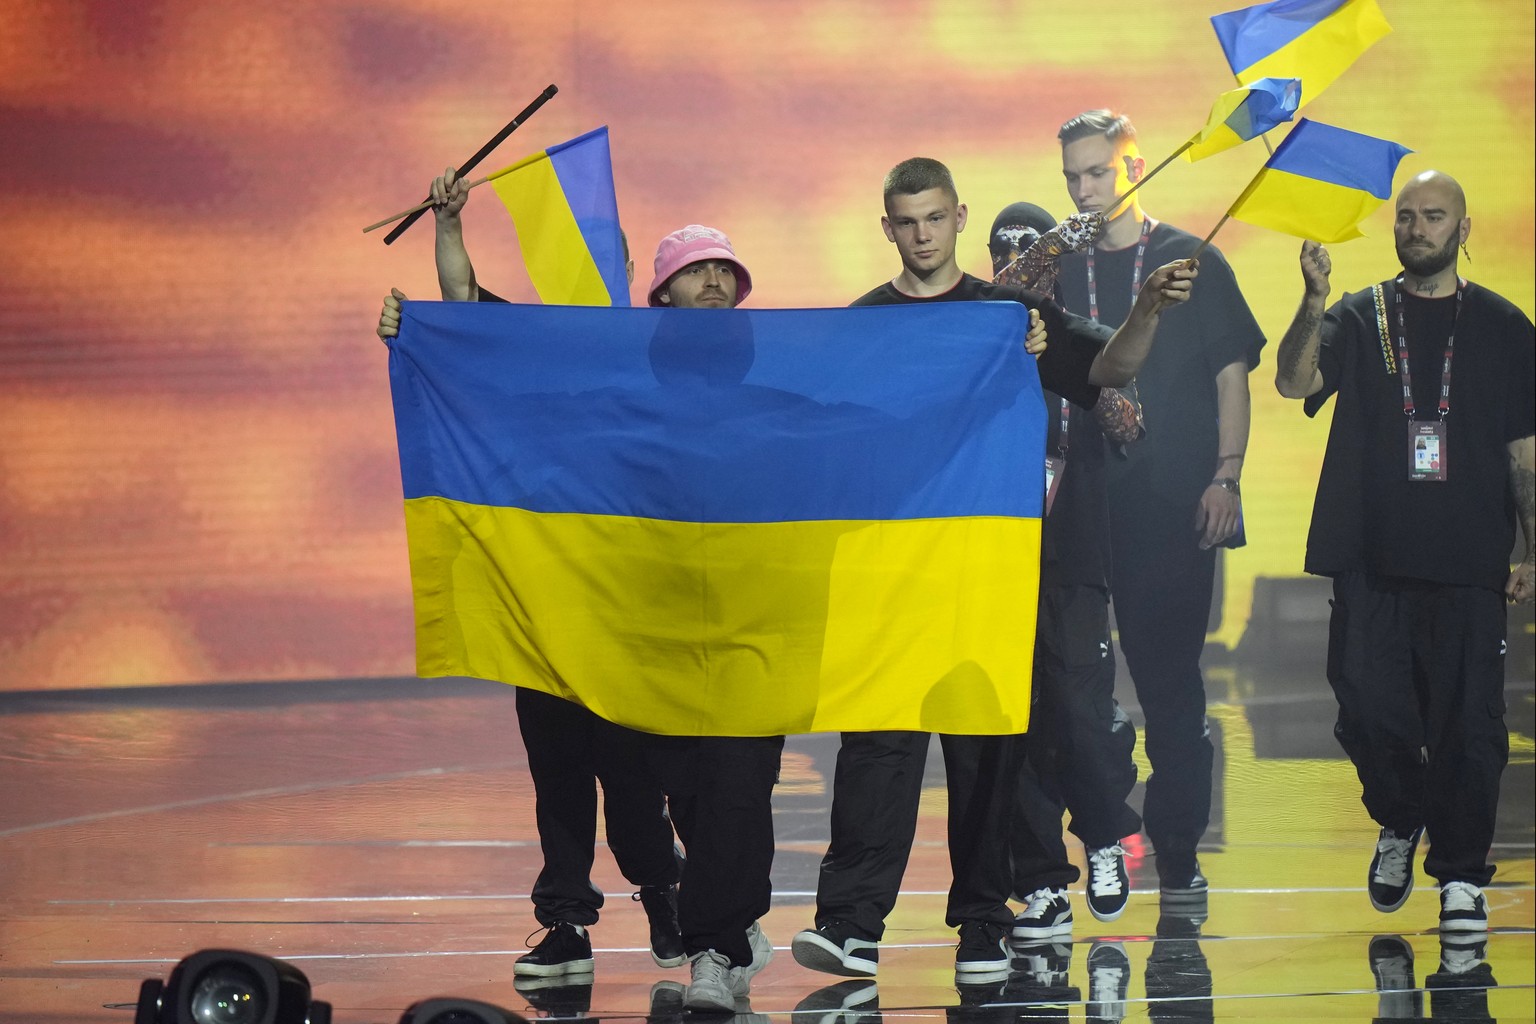 Kalush Orchestra from Ukraine arrives for the final dress rehearsal at the Eurovision Song Contest in Turin, Italy, Friday, May 13, 2022. (AP Photo/Luca Bruno)